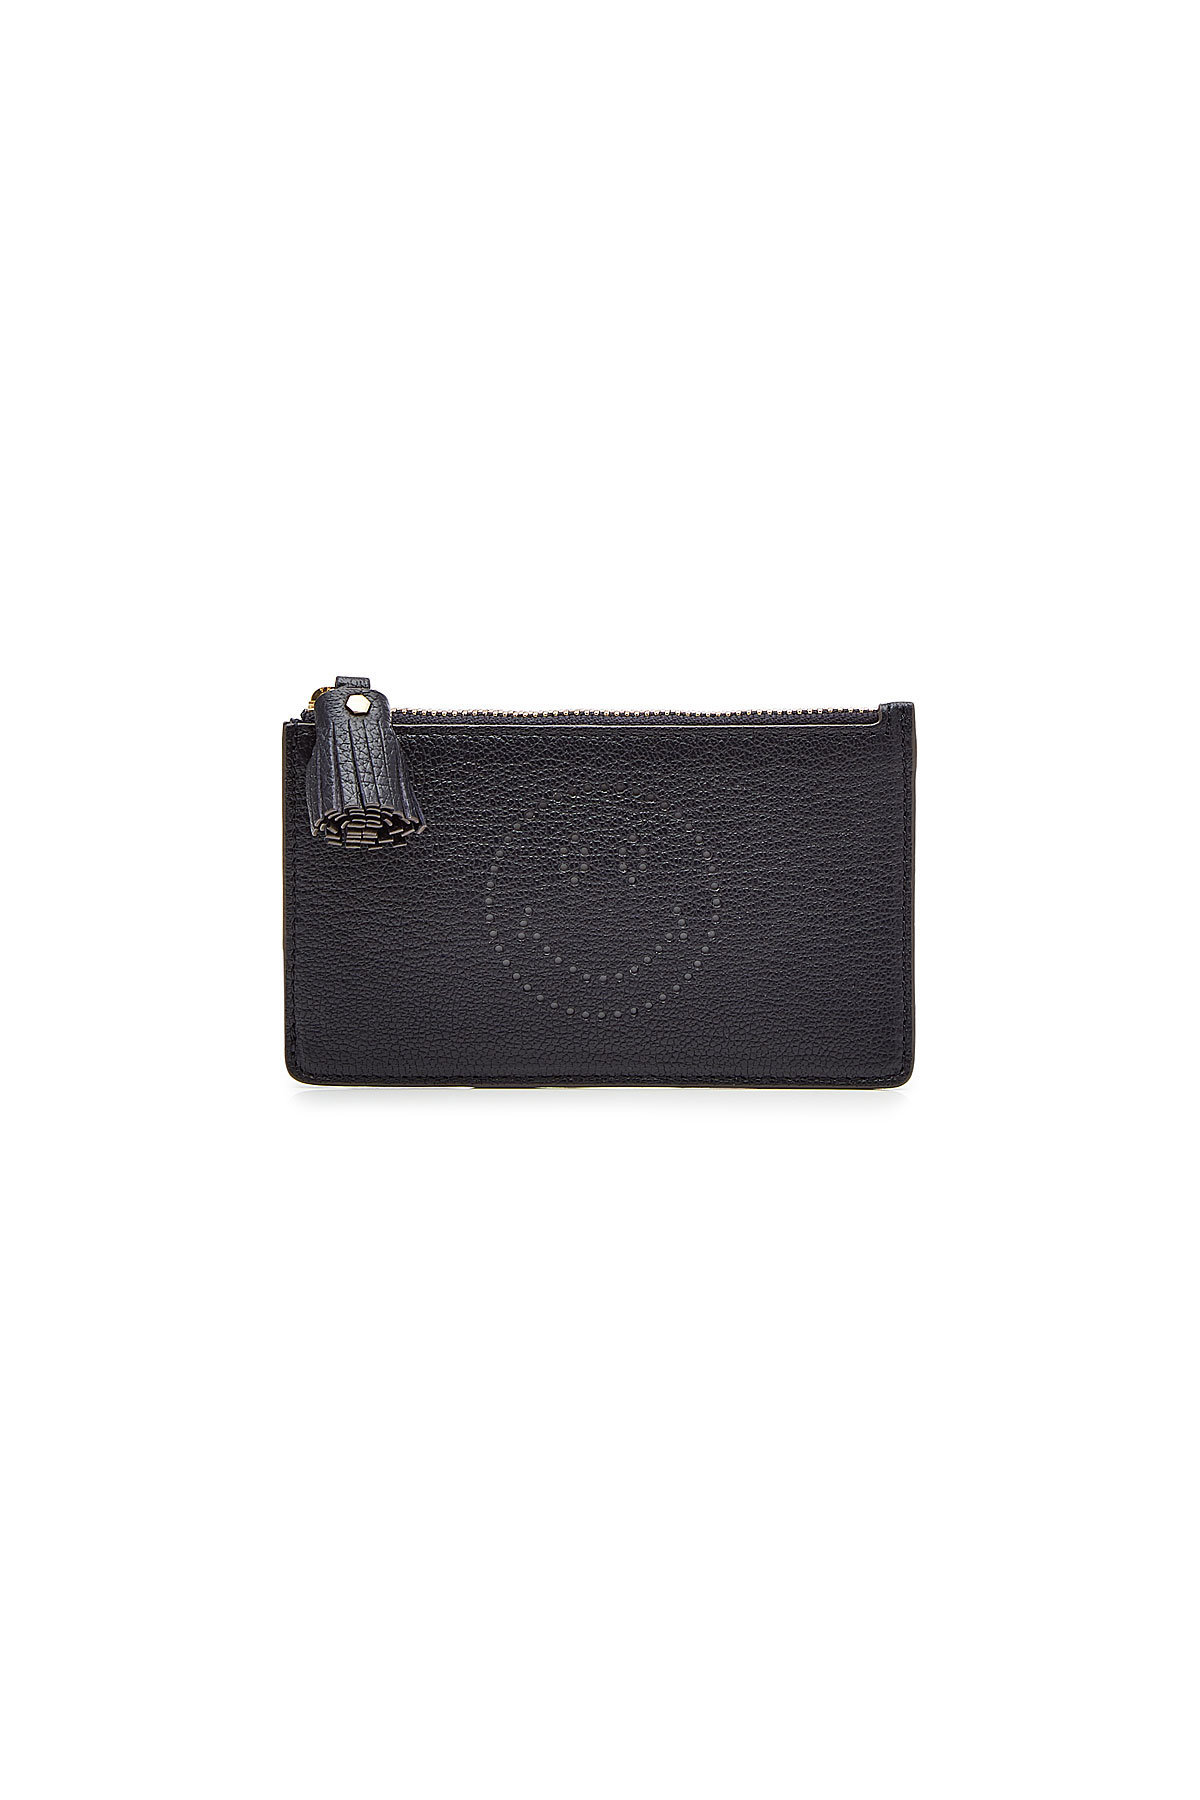 Anya Hindmarch - Smiley Leather Zipped Card and Key Case